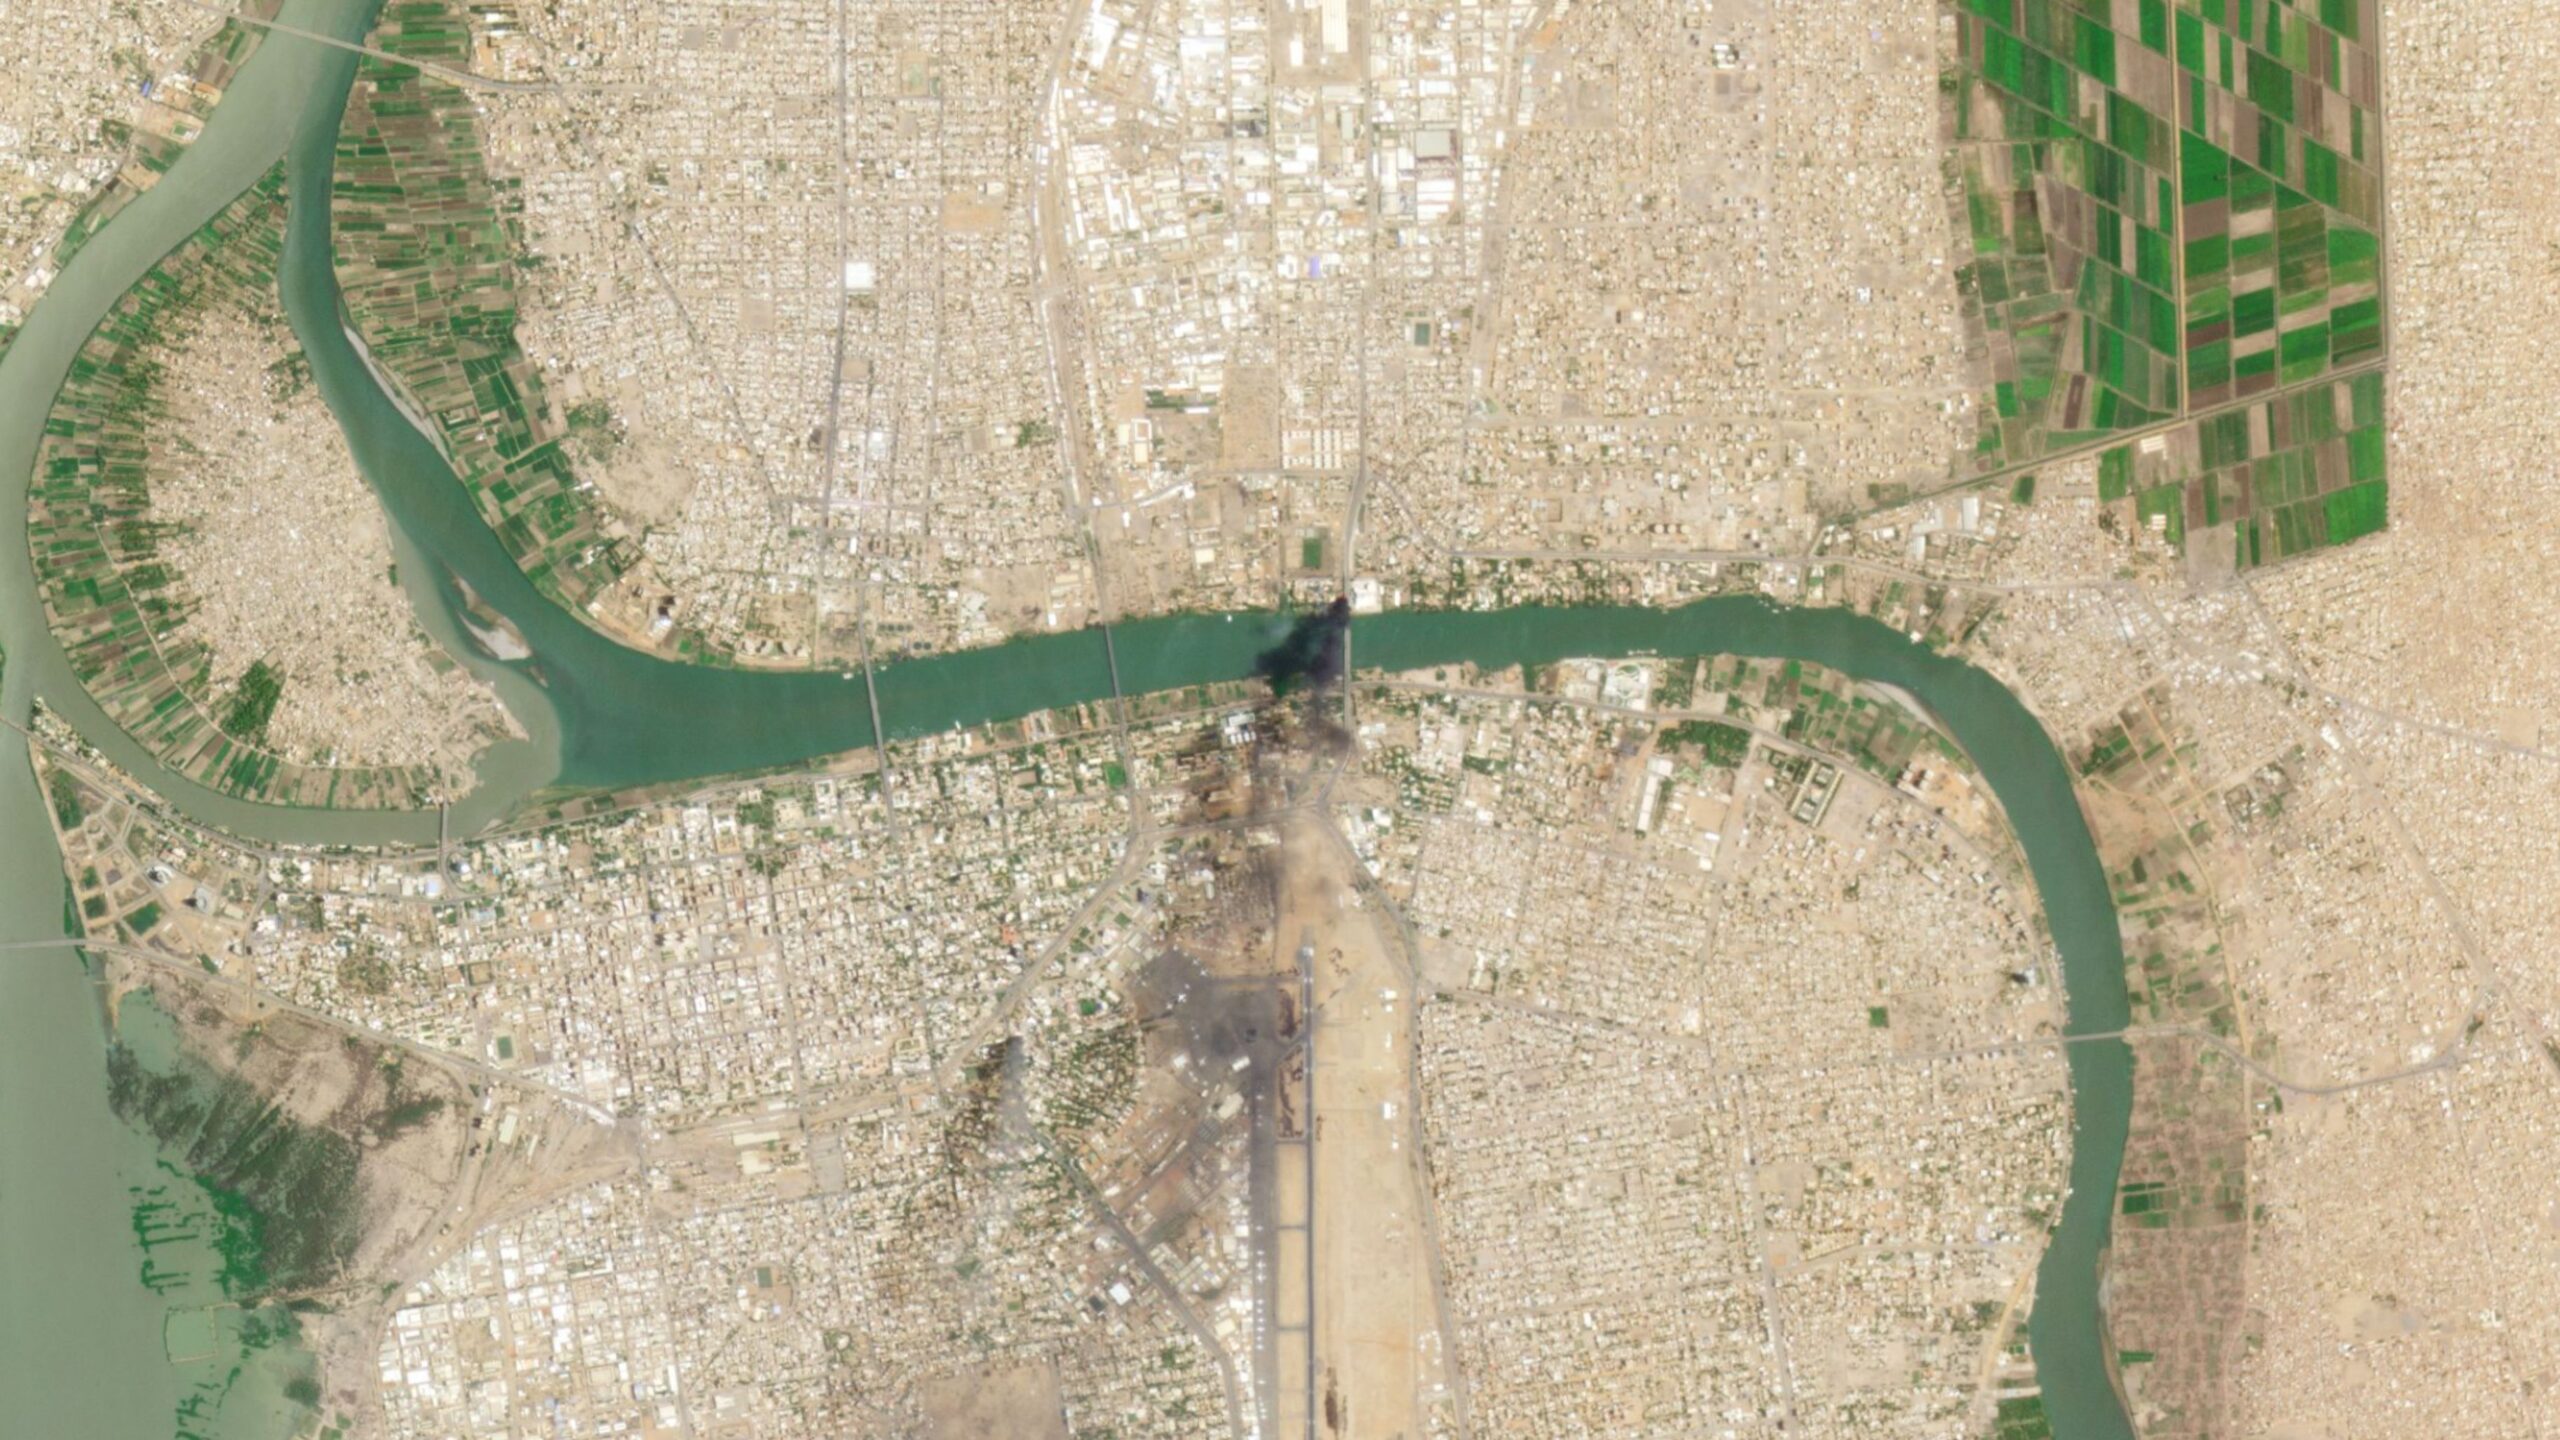 The recent outbreak of civil war in Sudan is visible in satellite images as bridges and other infrastructure are being targeted.